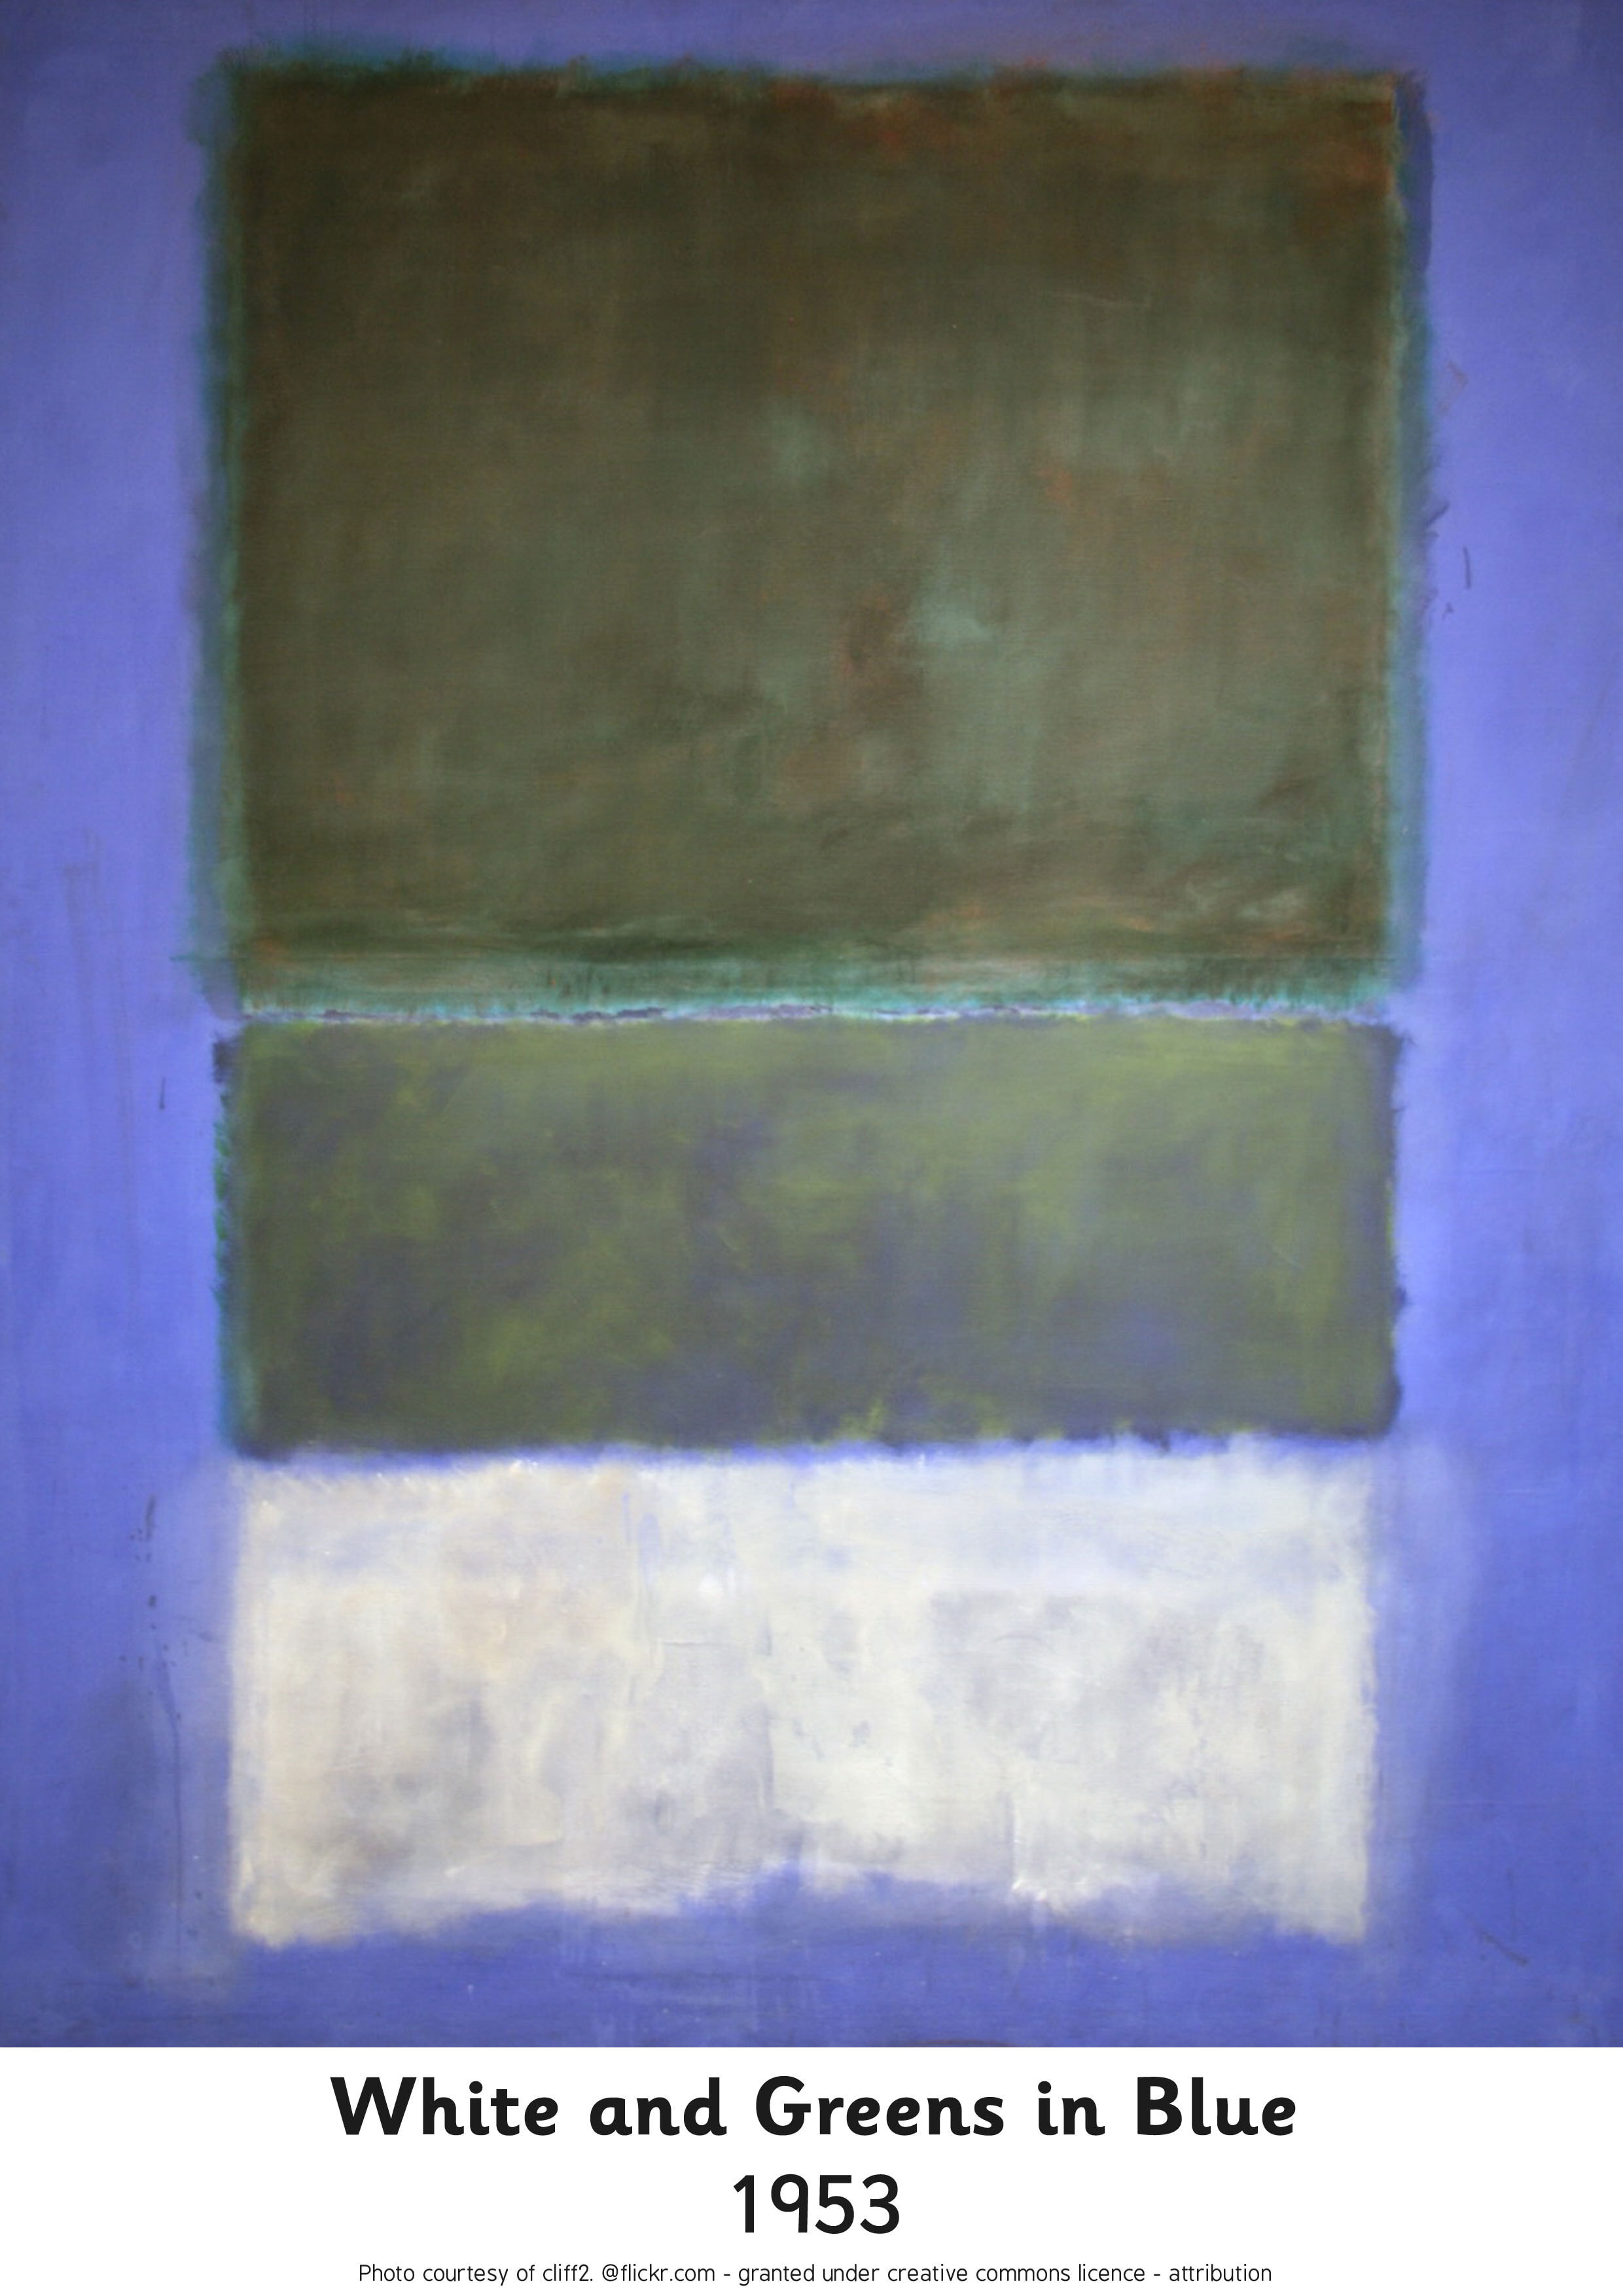 Mark Rothko, White and Greens in Blue, 1953